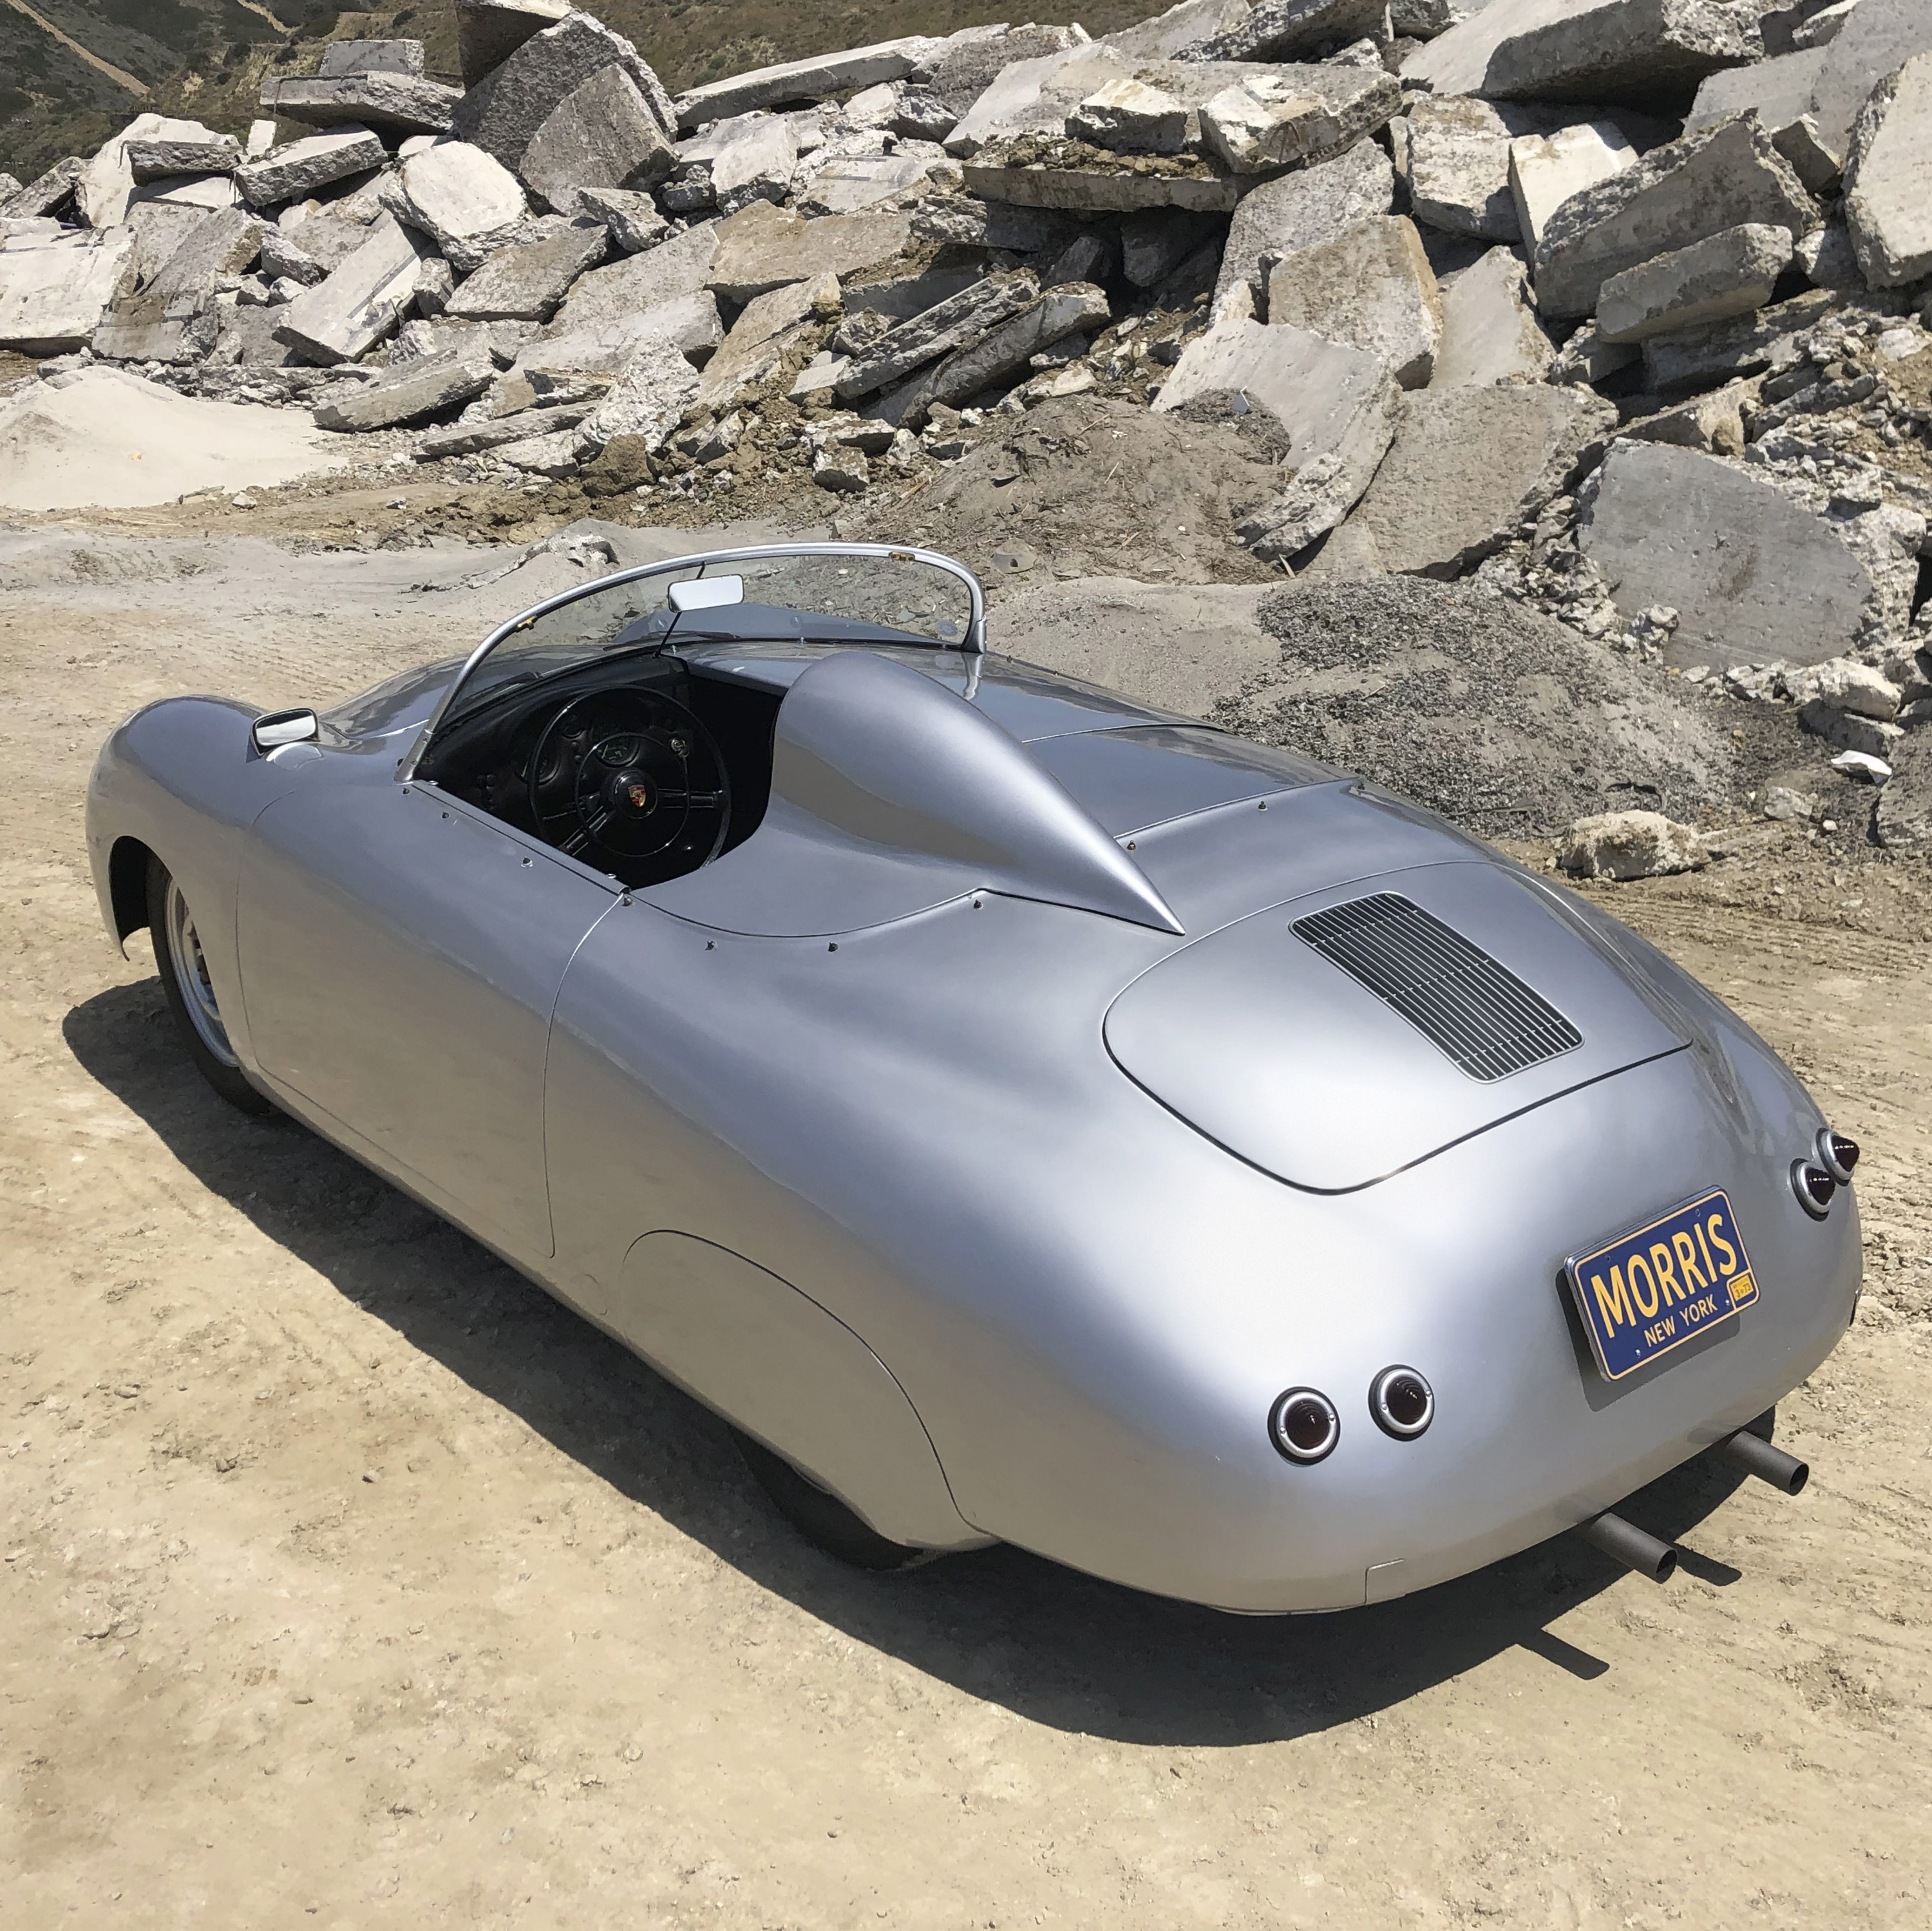 Another angle on the 1956 Porsche 356 Speedster modified by its owner, sculptor Robert Morris, est. $250,000-$350,000. Image courtesy of Rago/Wright/LAMA